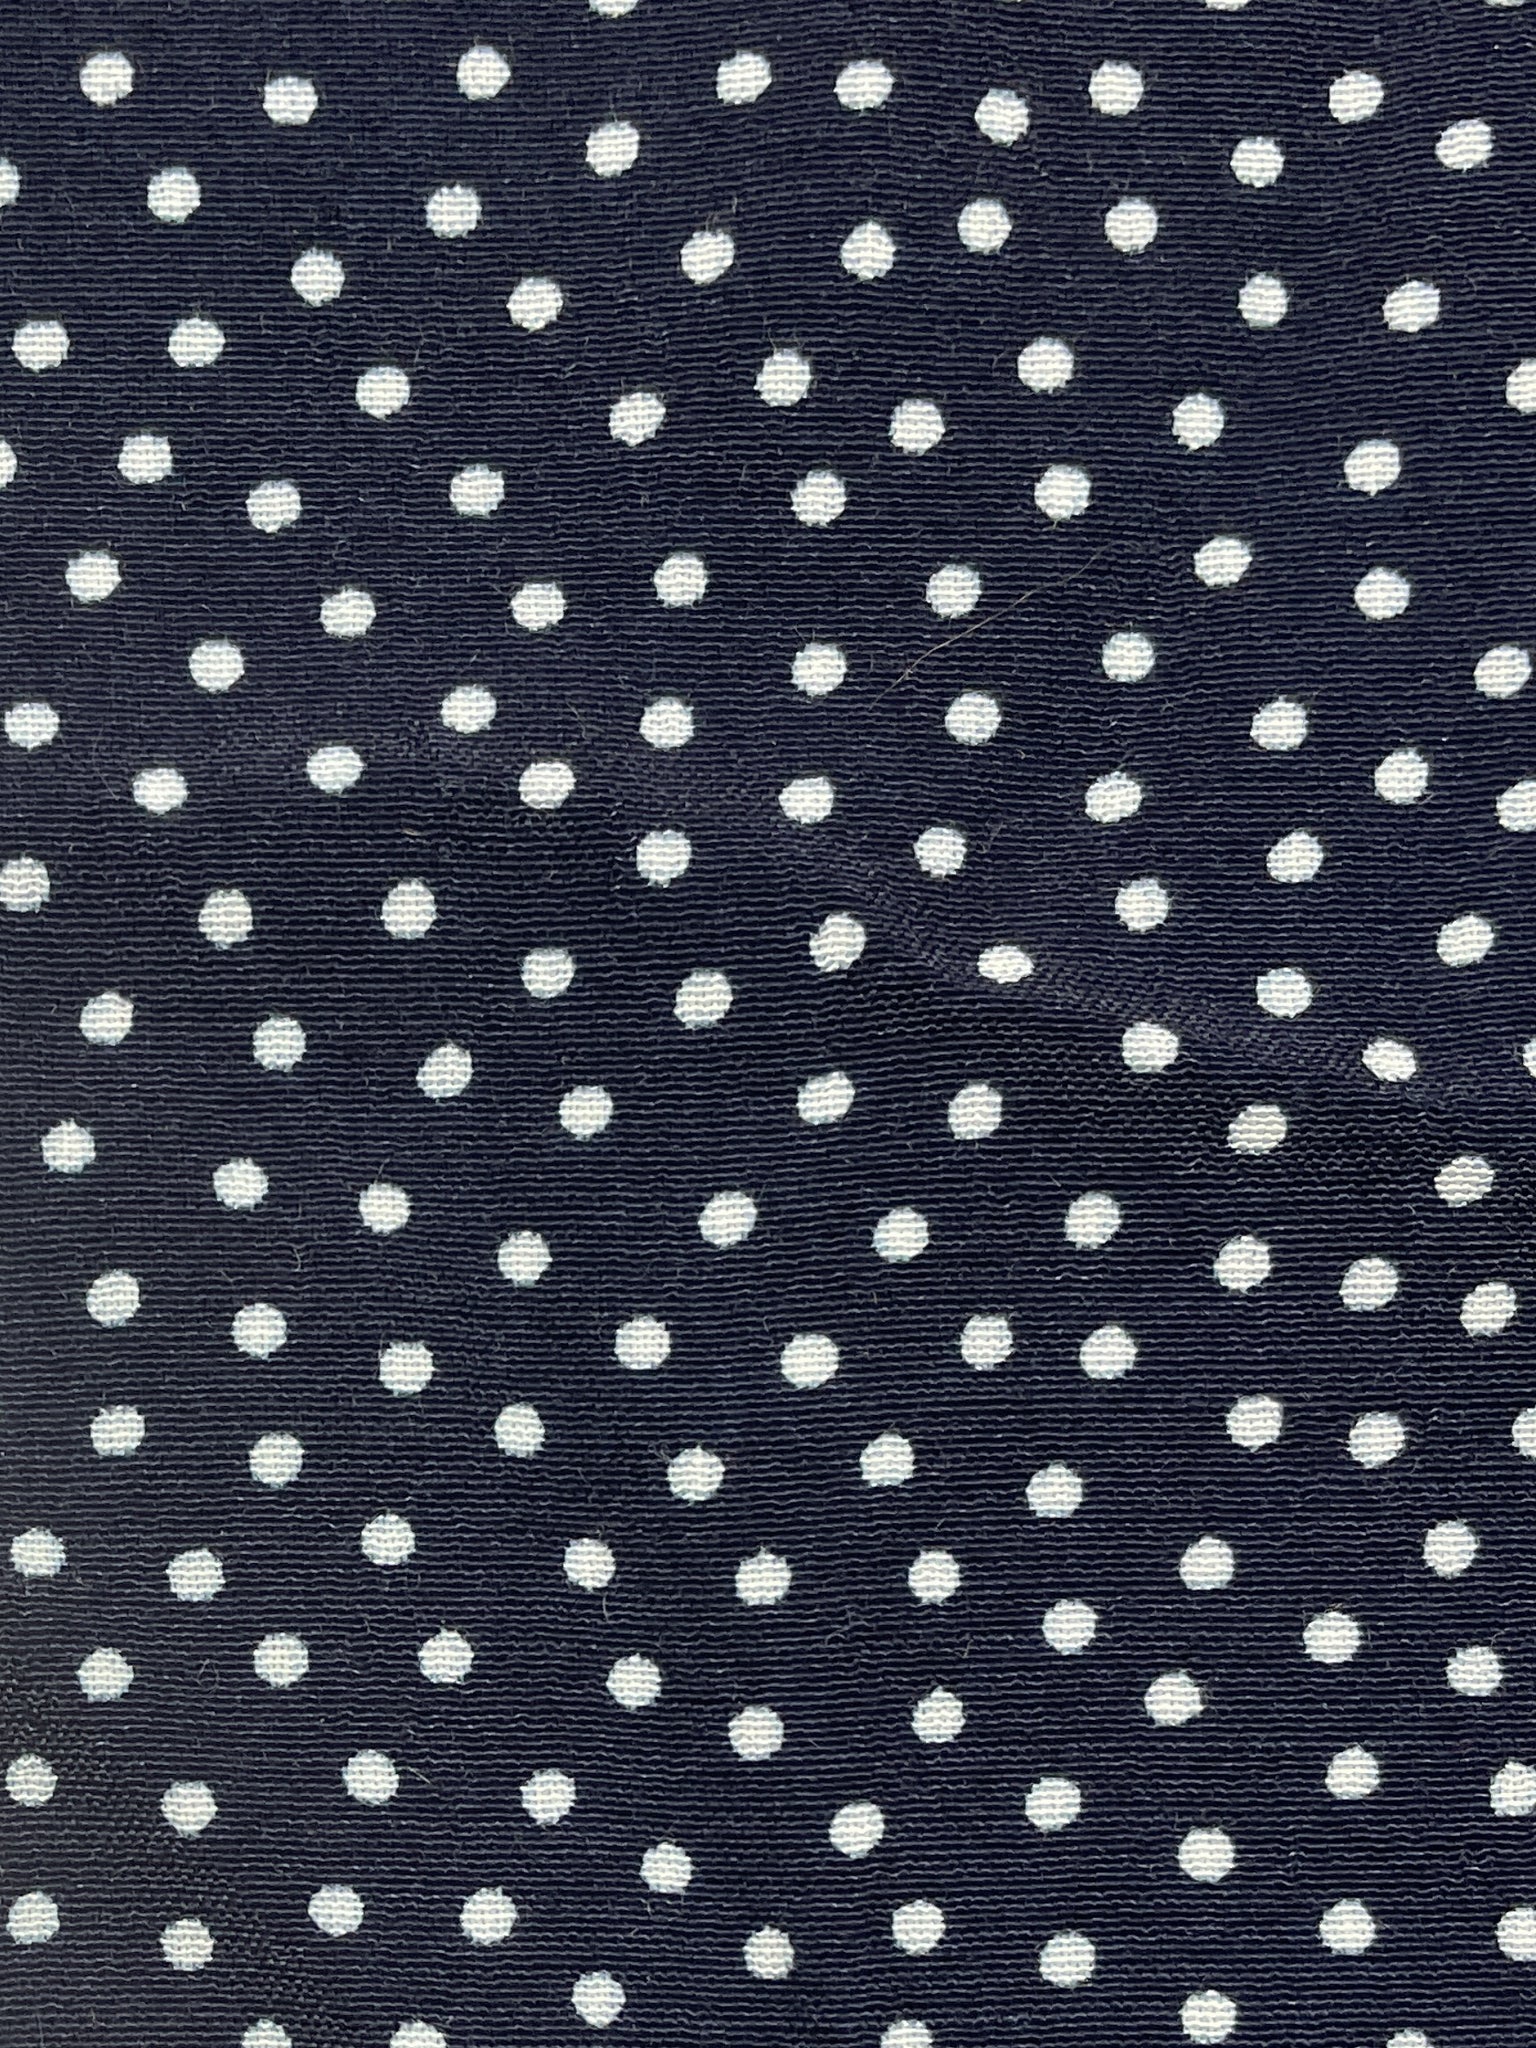 1 1/2 YD Rayon Vintage - Navy Blue with White Polka Dots